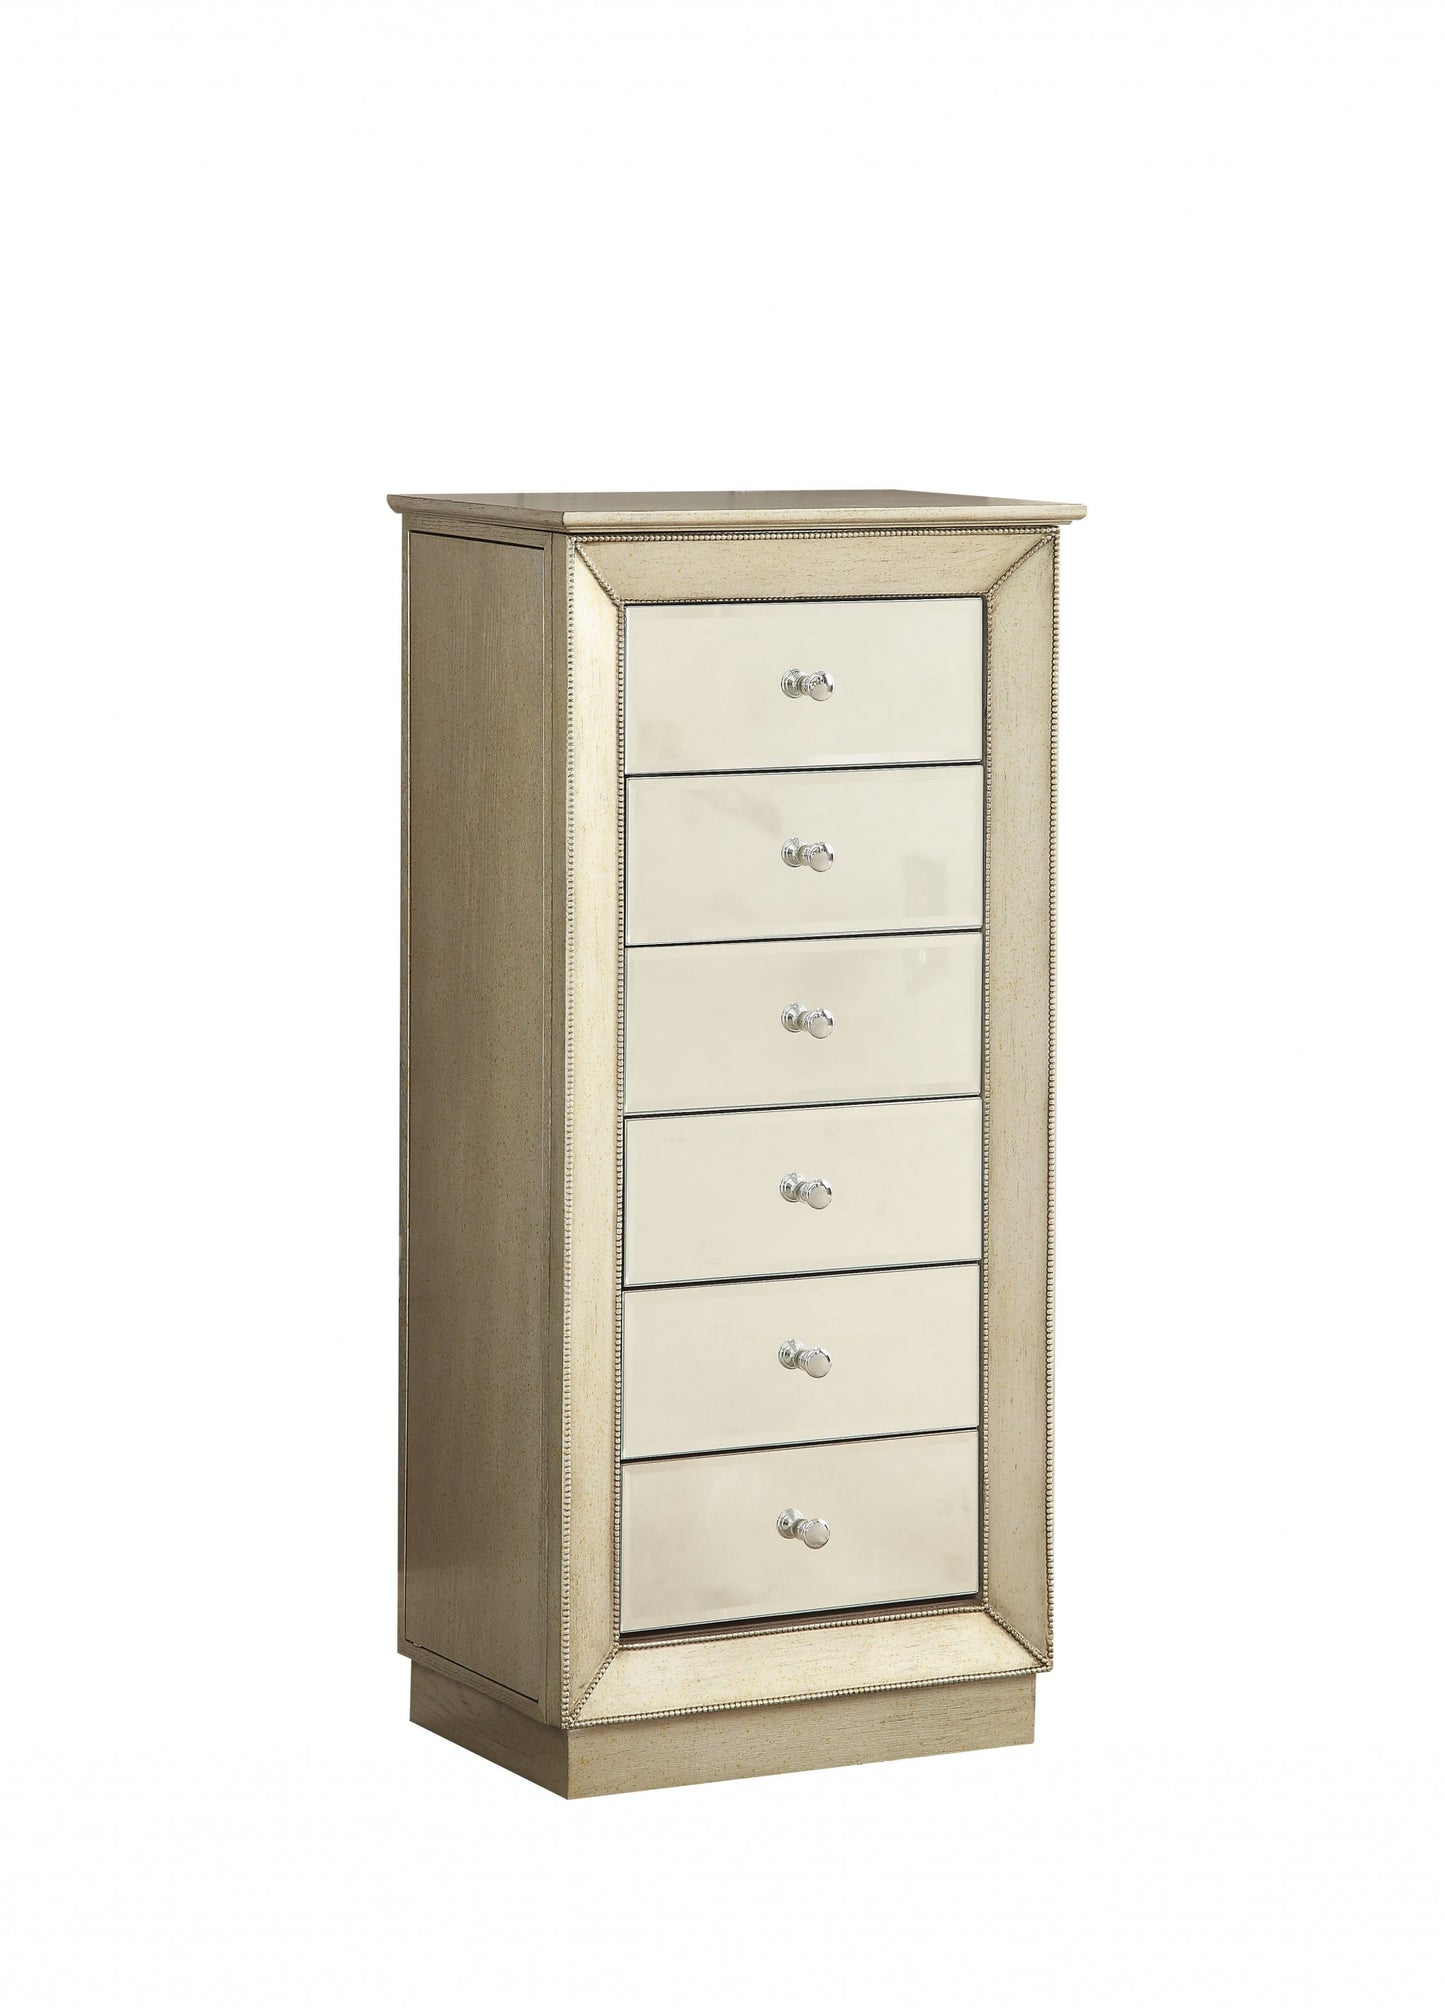 38" White Six Drawer Wood and Mirrored Glass Jewelry Armoire